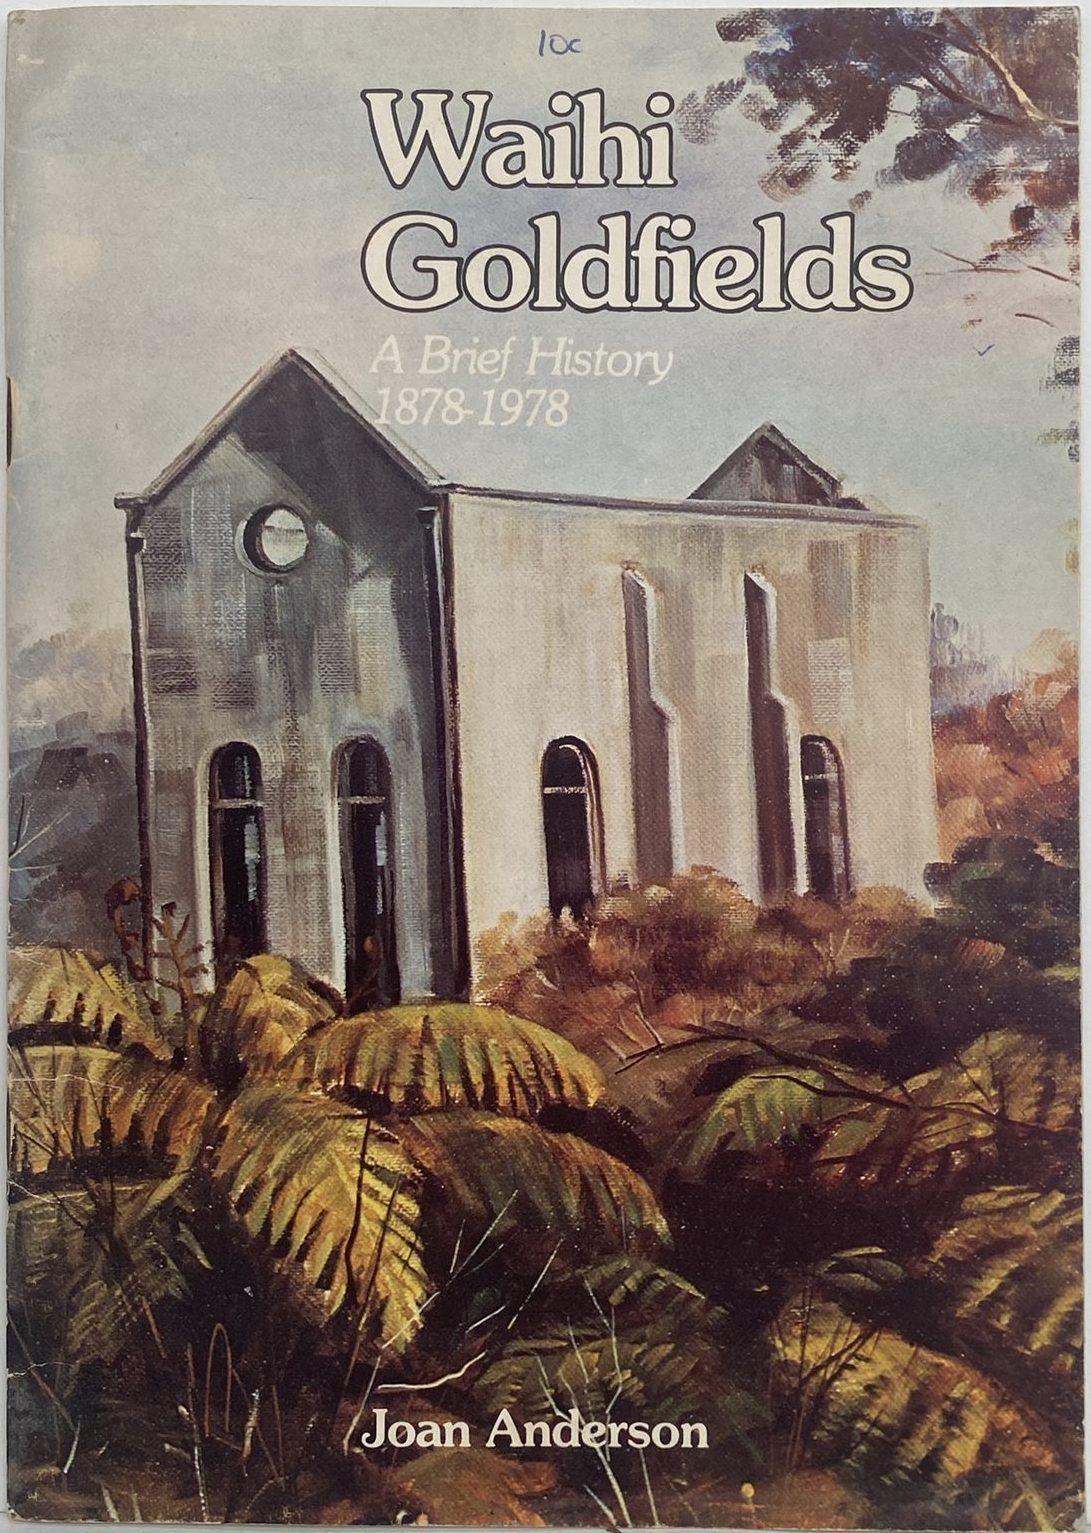 WAIHI GOLDFIELDS: A Brief History 1878-1978